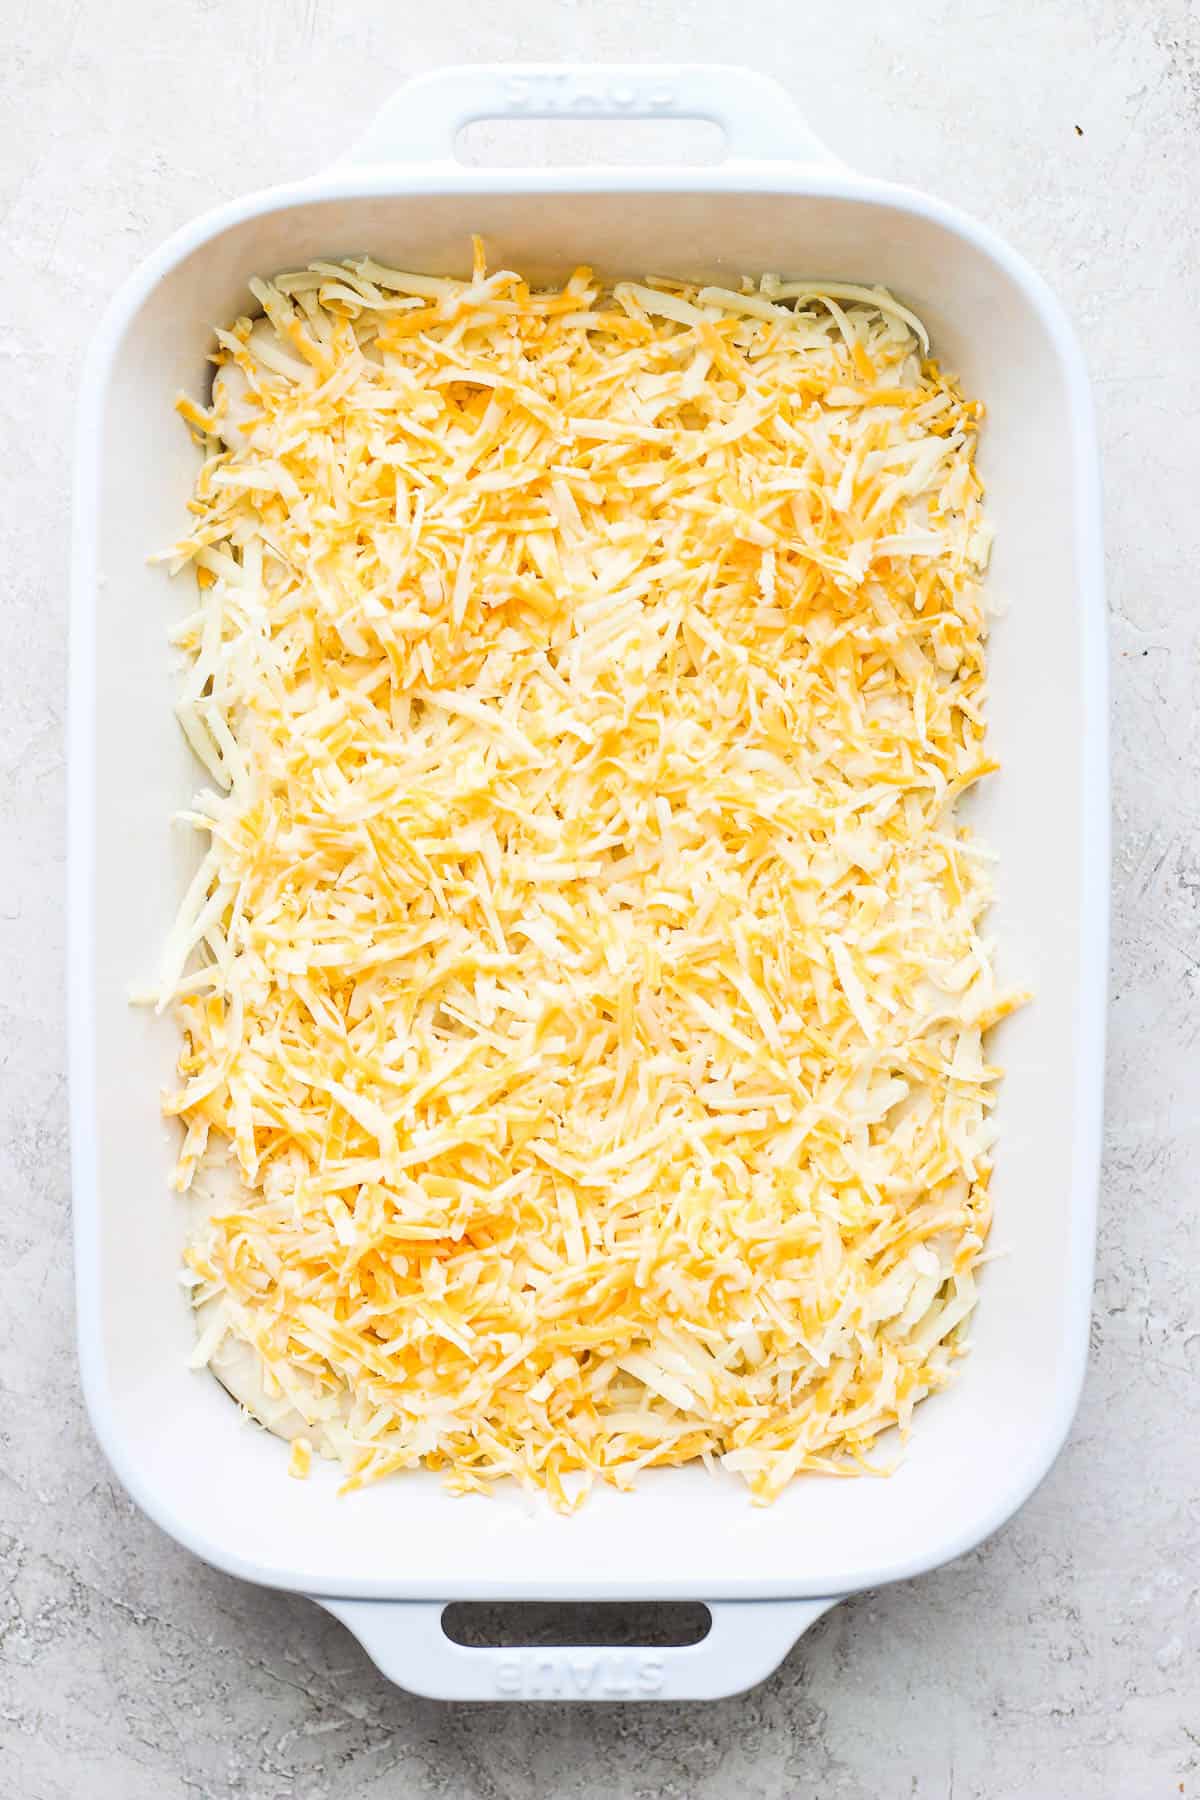 Half of the shredded cheese added on top.